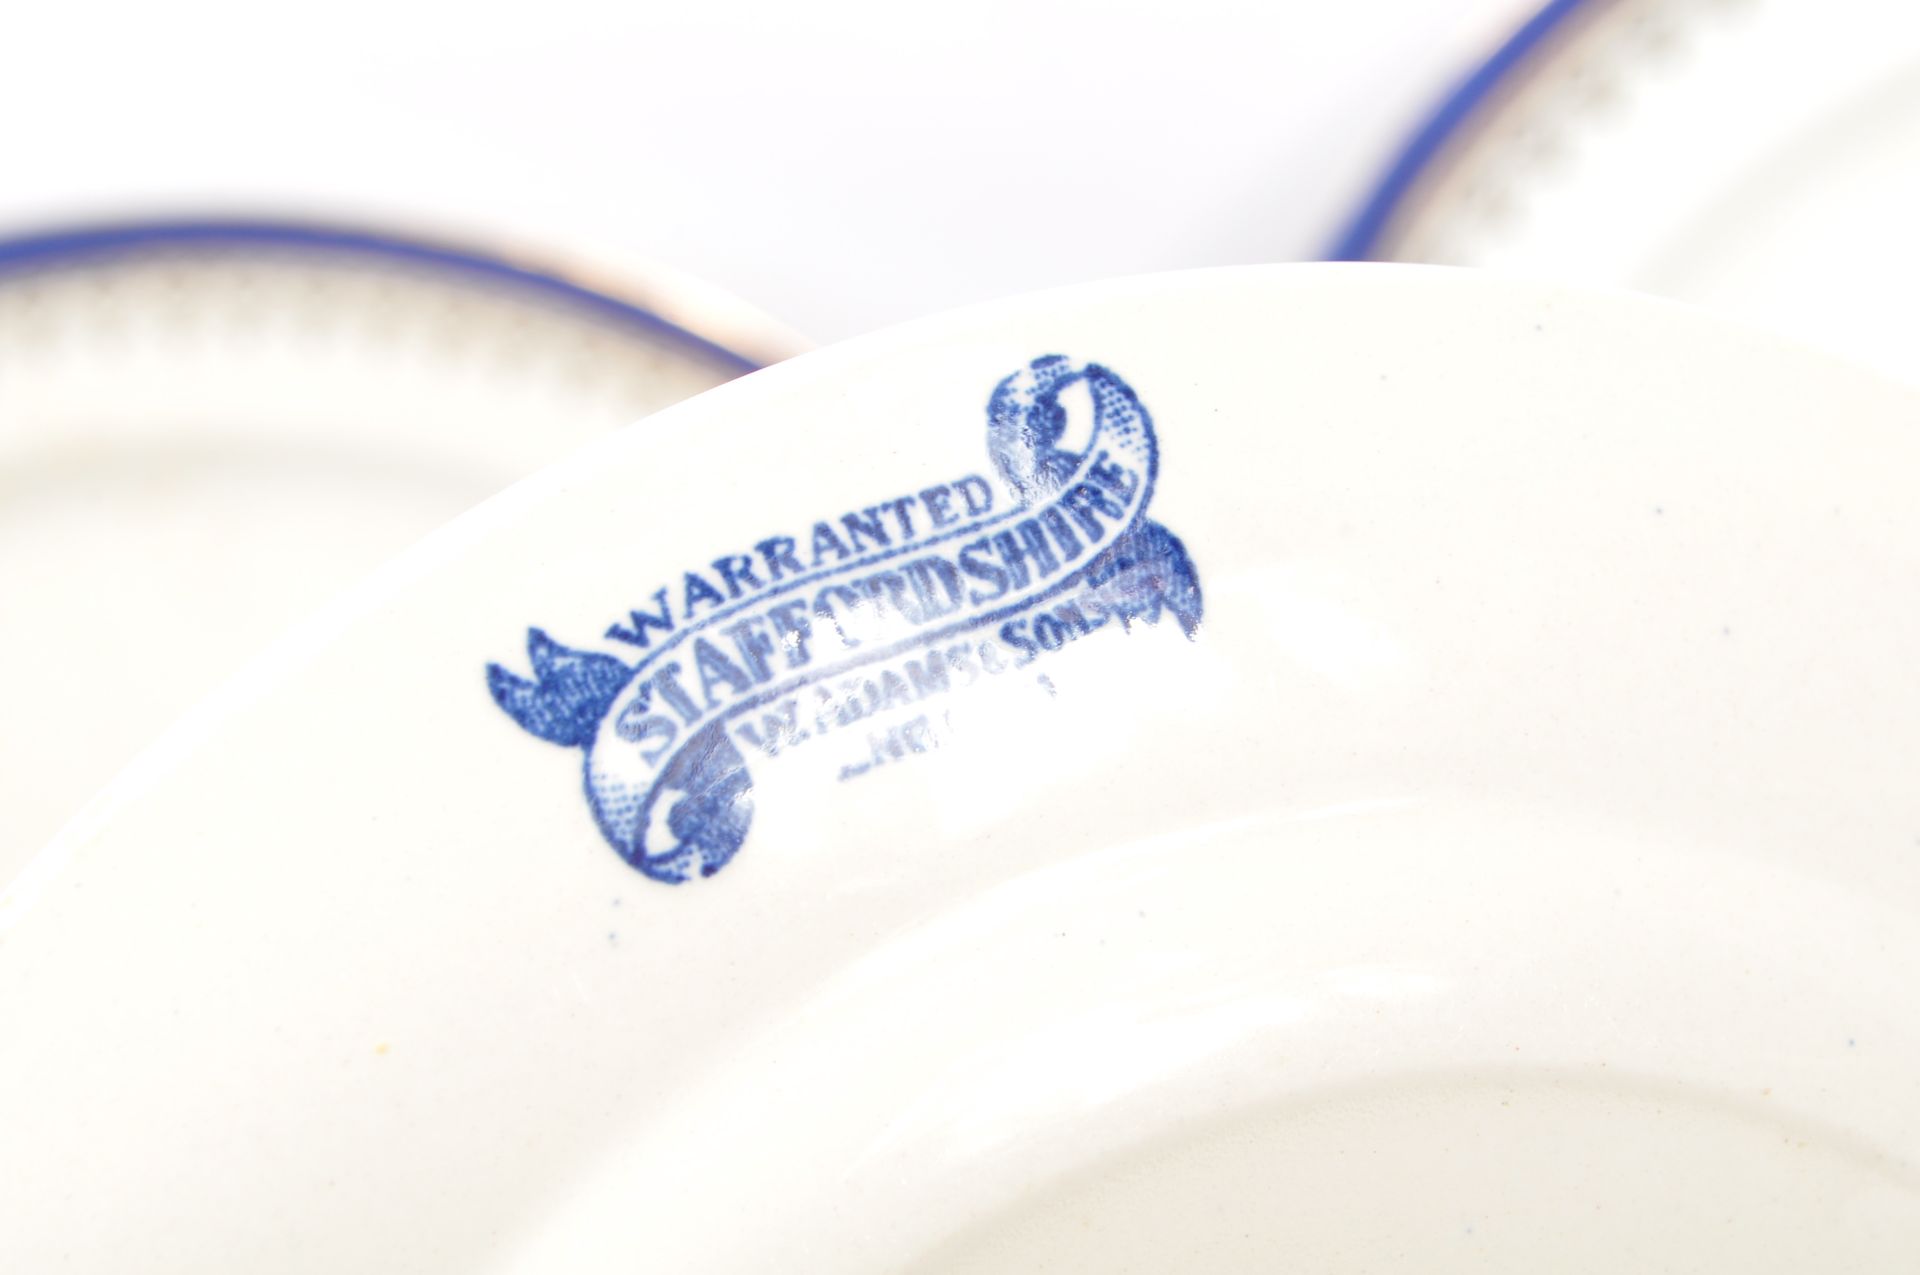 ROYAL DOULTON / SPODE / STAFFORDSHIRE - BLUE AND WHITE PORCELAIN - Image 7 of 8